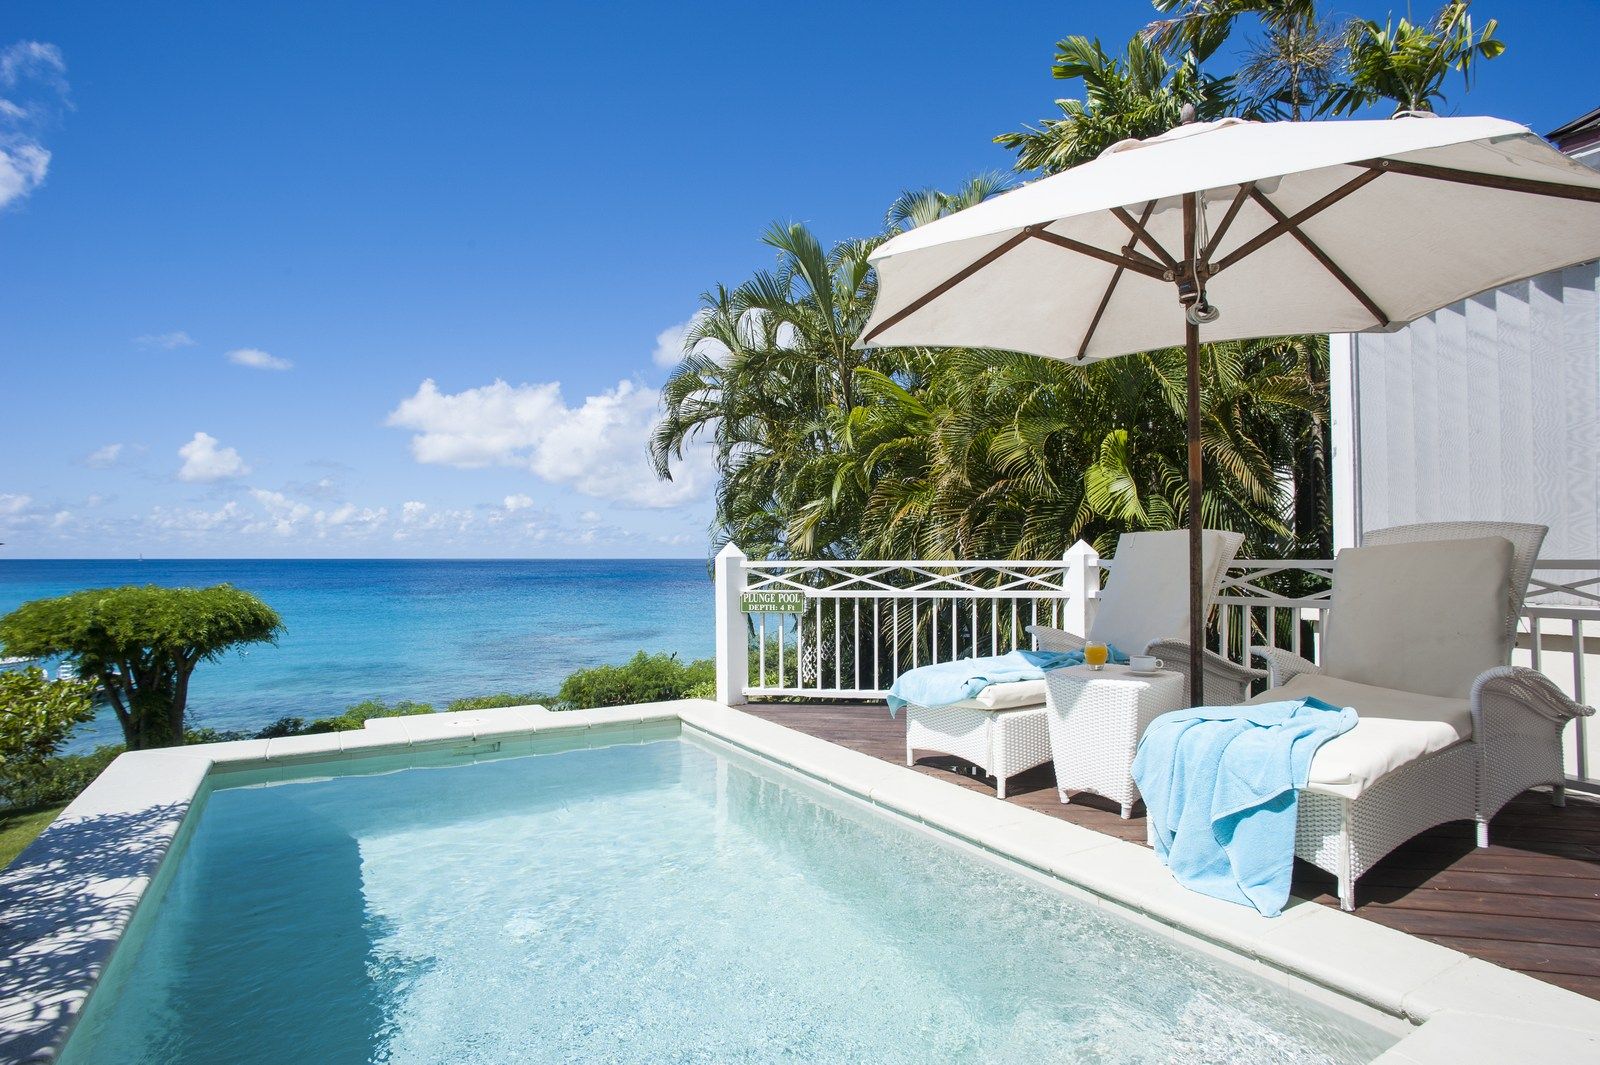 Private pool at The Cotton House, Mustique